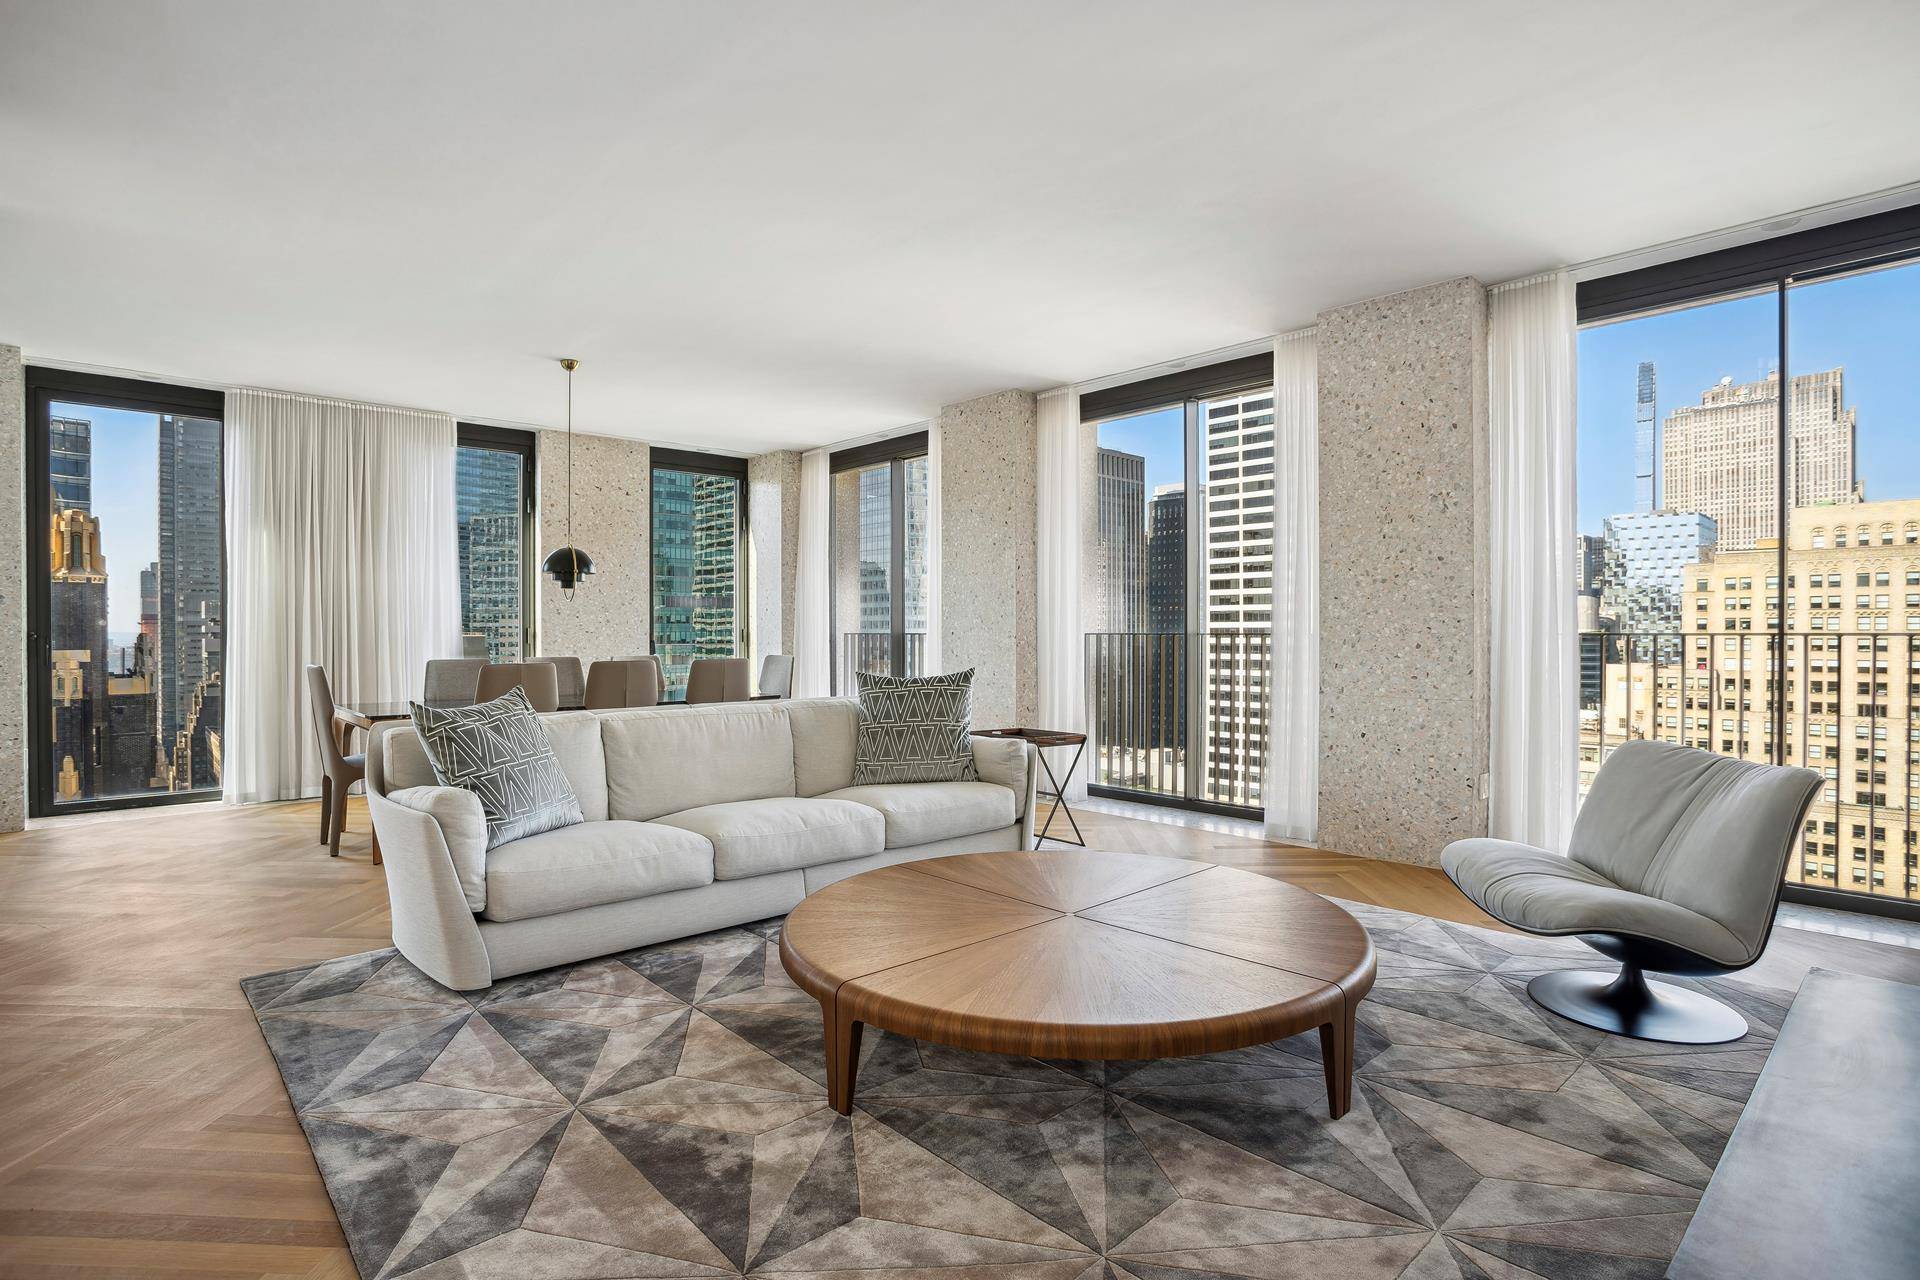 Sun flooded, high floor Condo, with an expansive layout, skyline views and over looking Bryant Park.